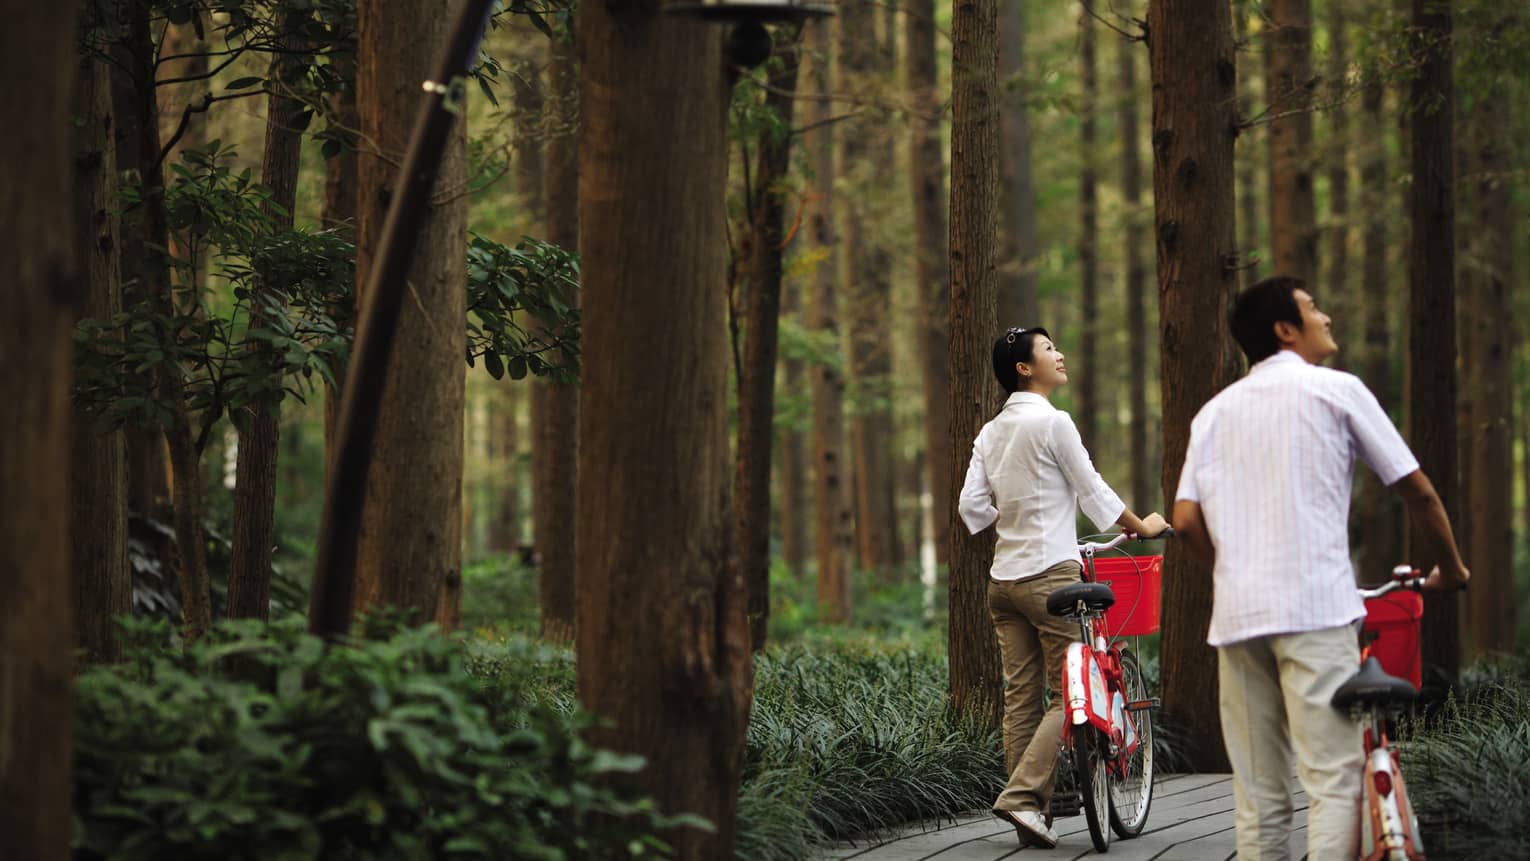 Couple walks bicycles through forest nature trail, looks up at trees